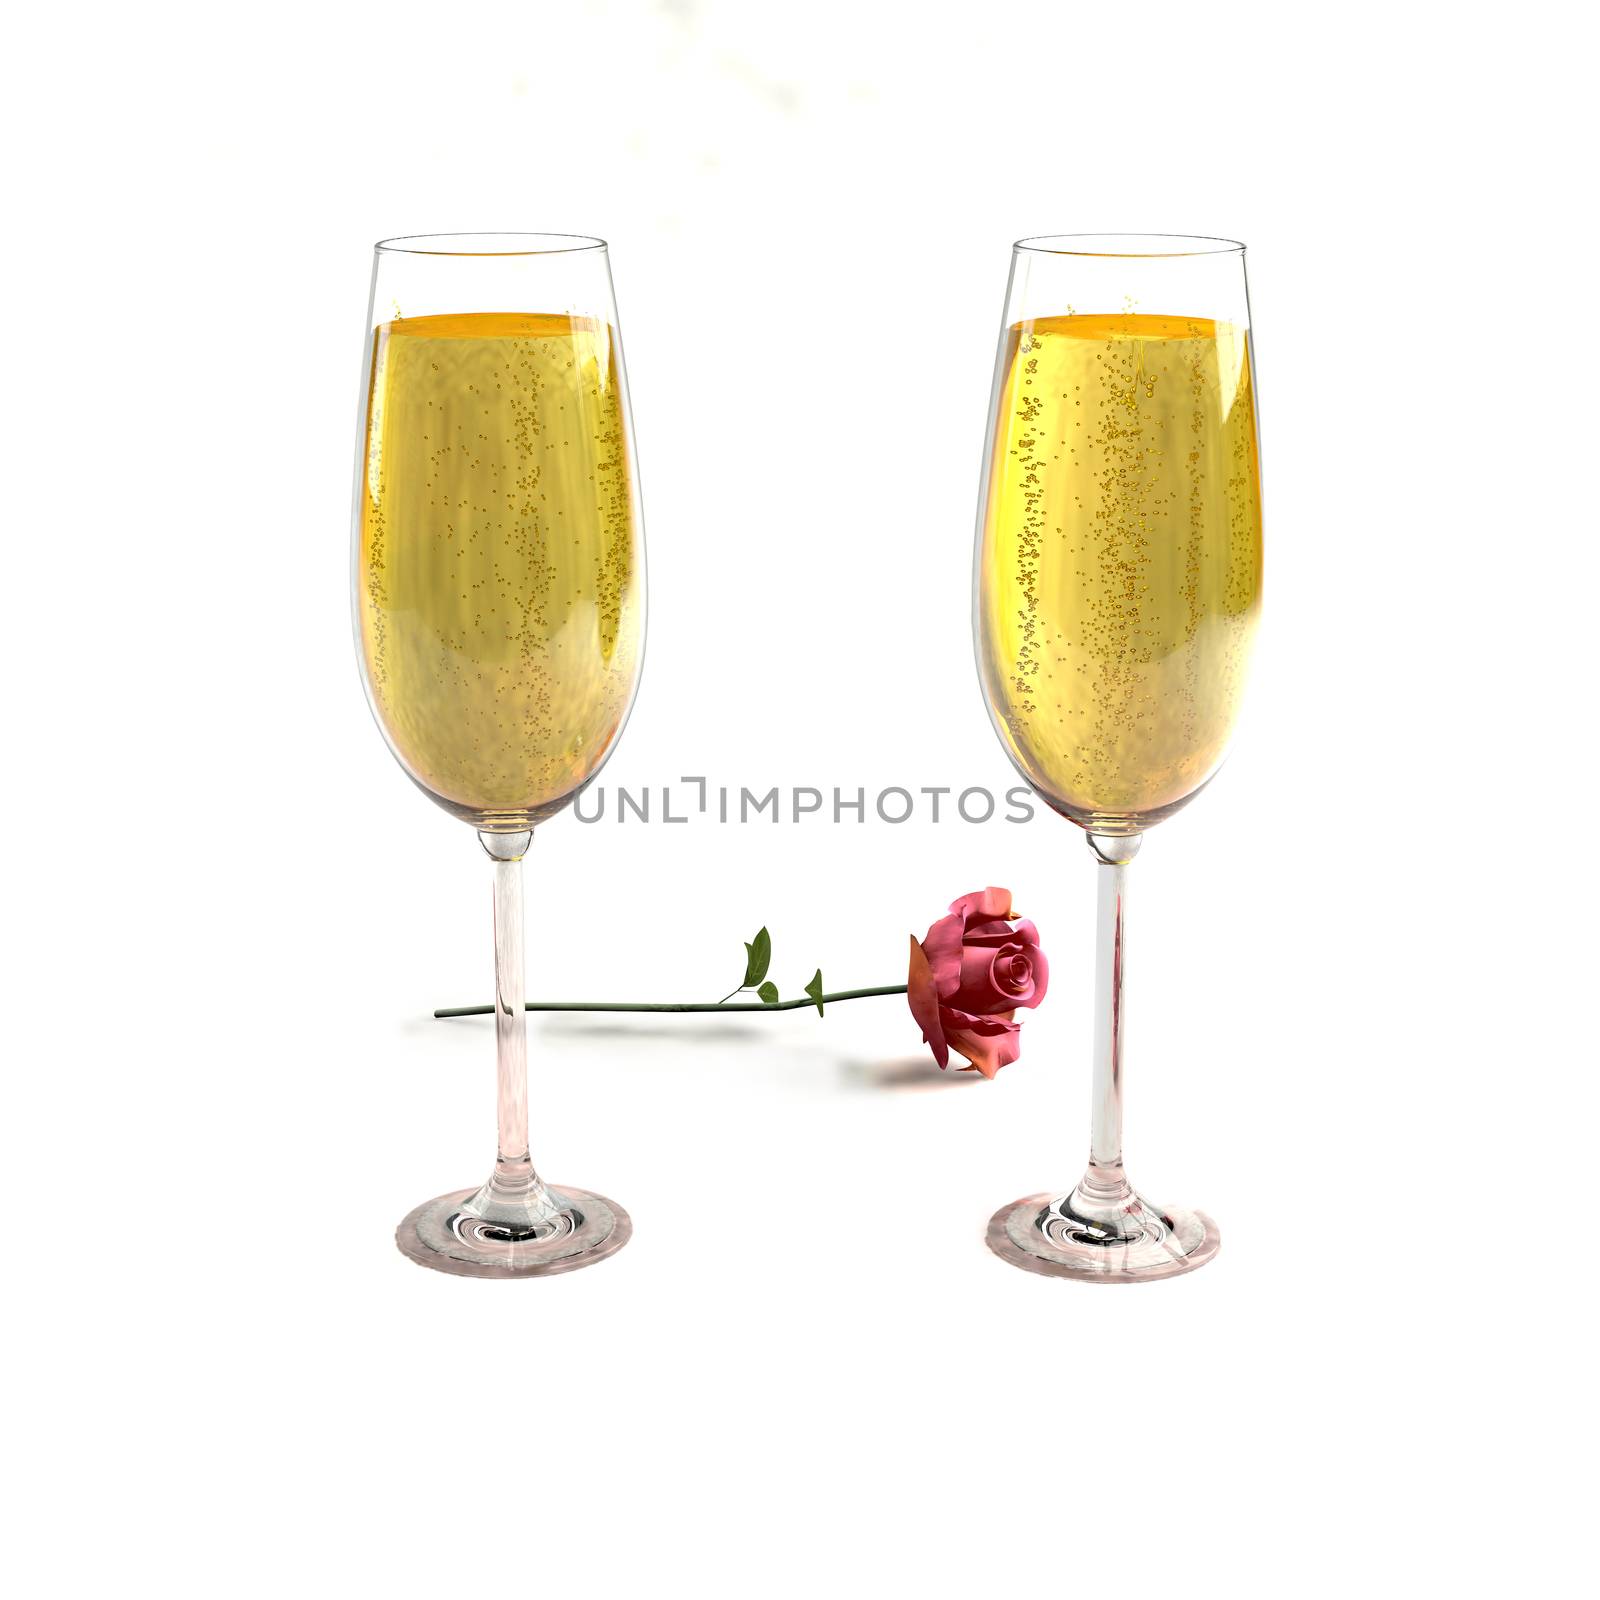 Two glasses of good champagne and a rose on a white background which symbolizes love.